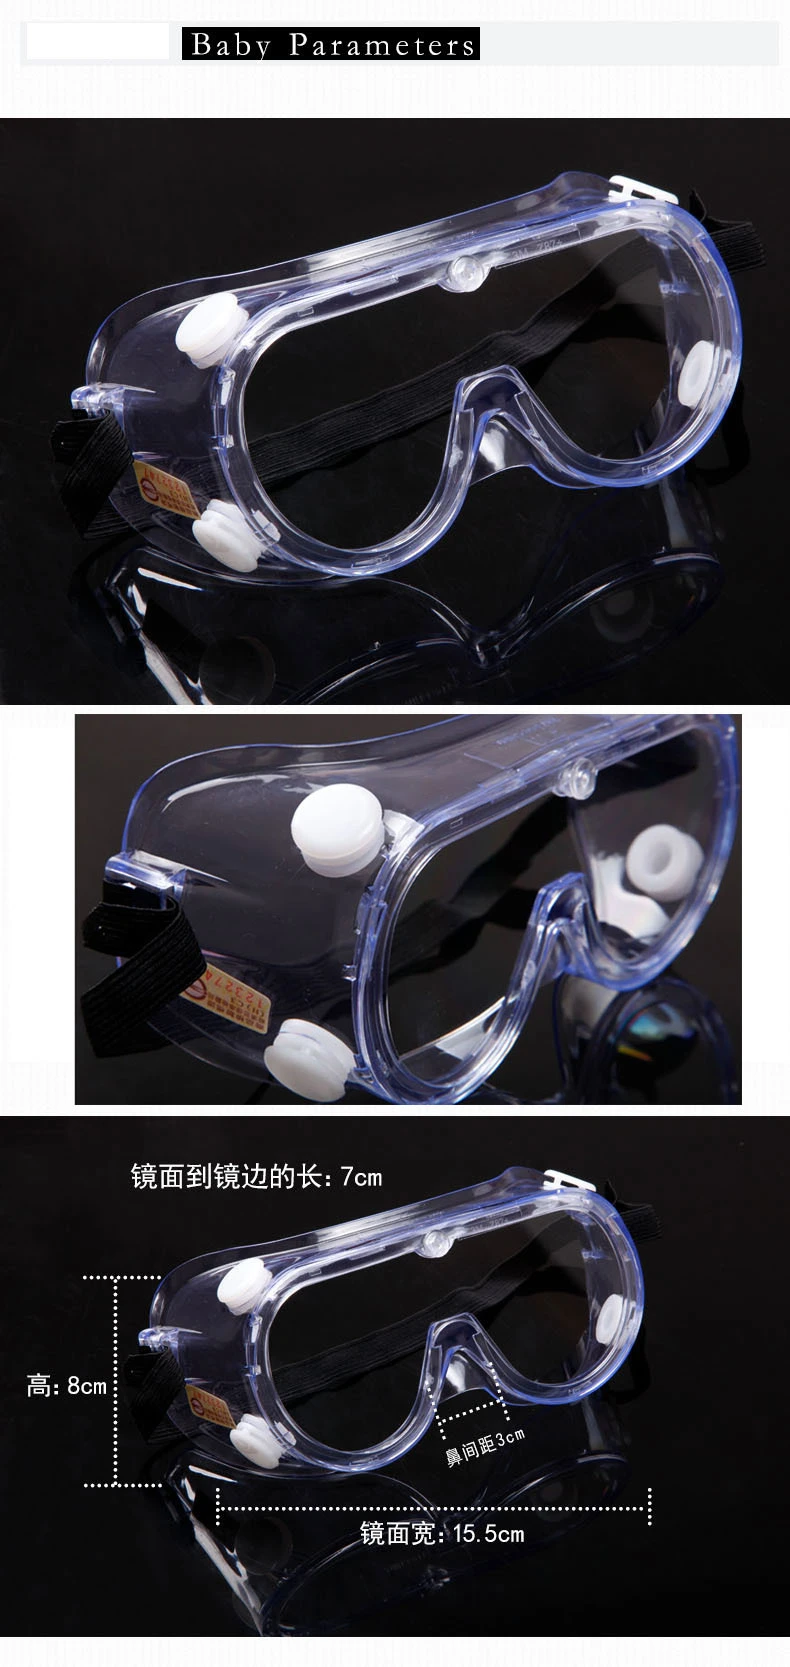 2020 Ready Stock Wholesale Safety Goggles Anti-Fog High Impact Protective Goggles